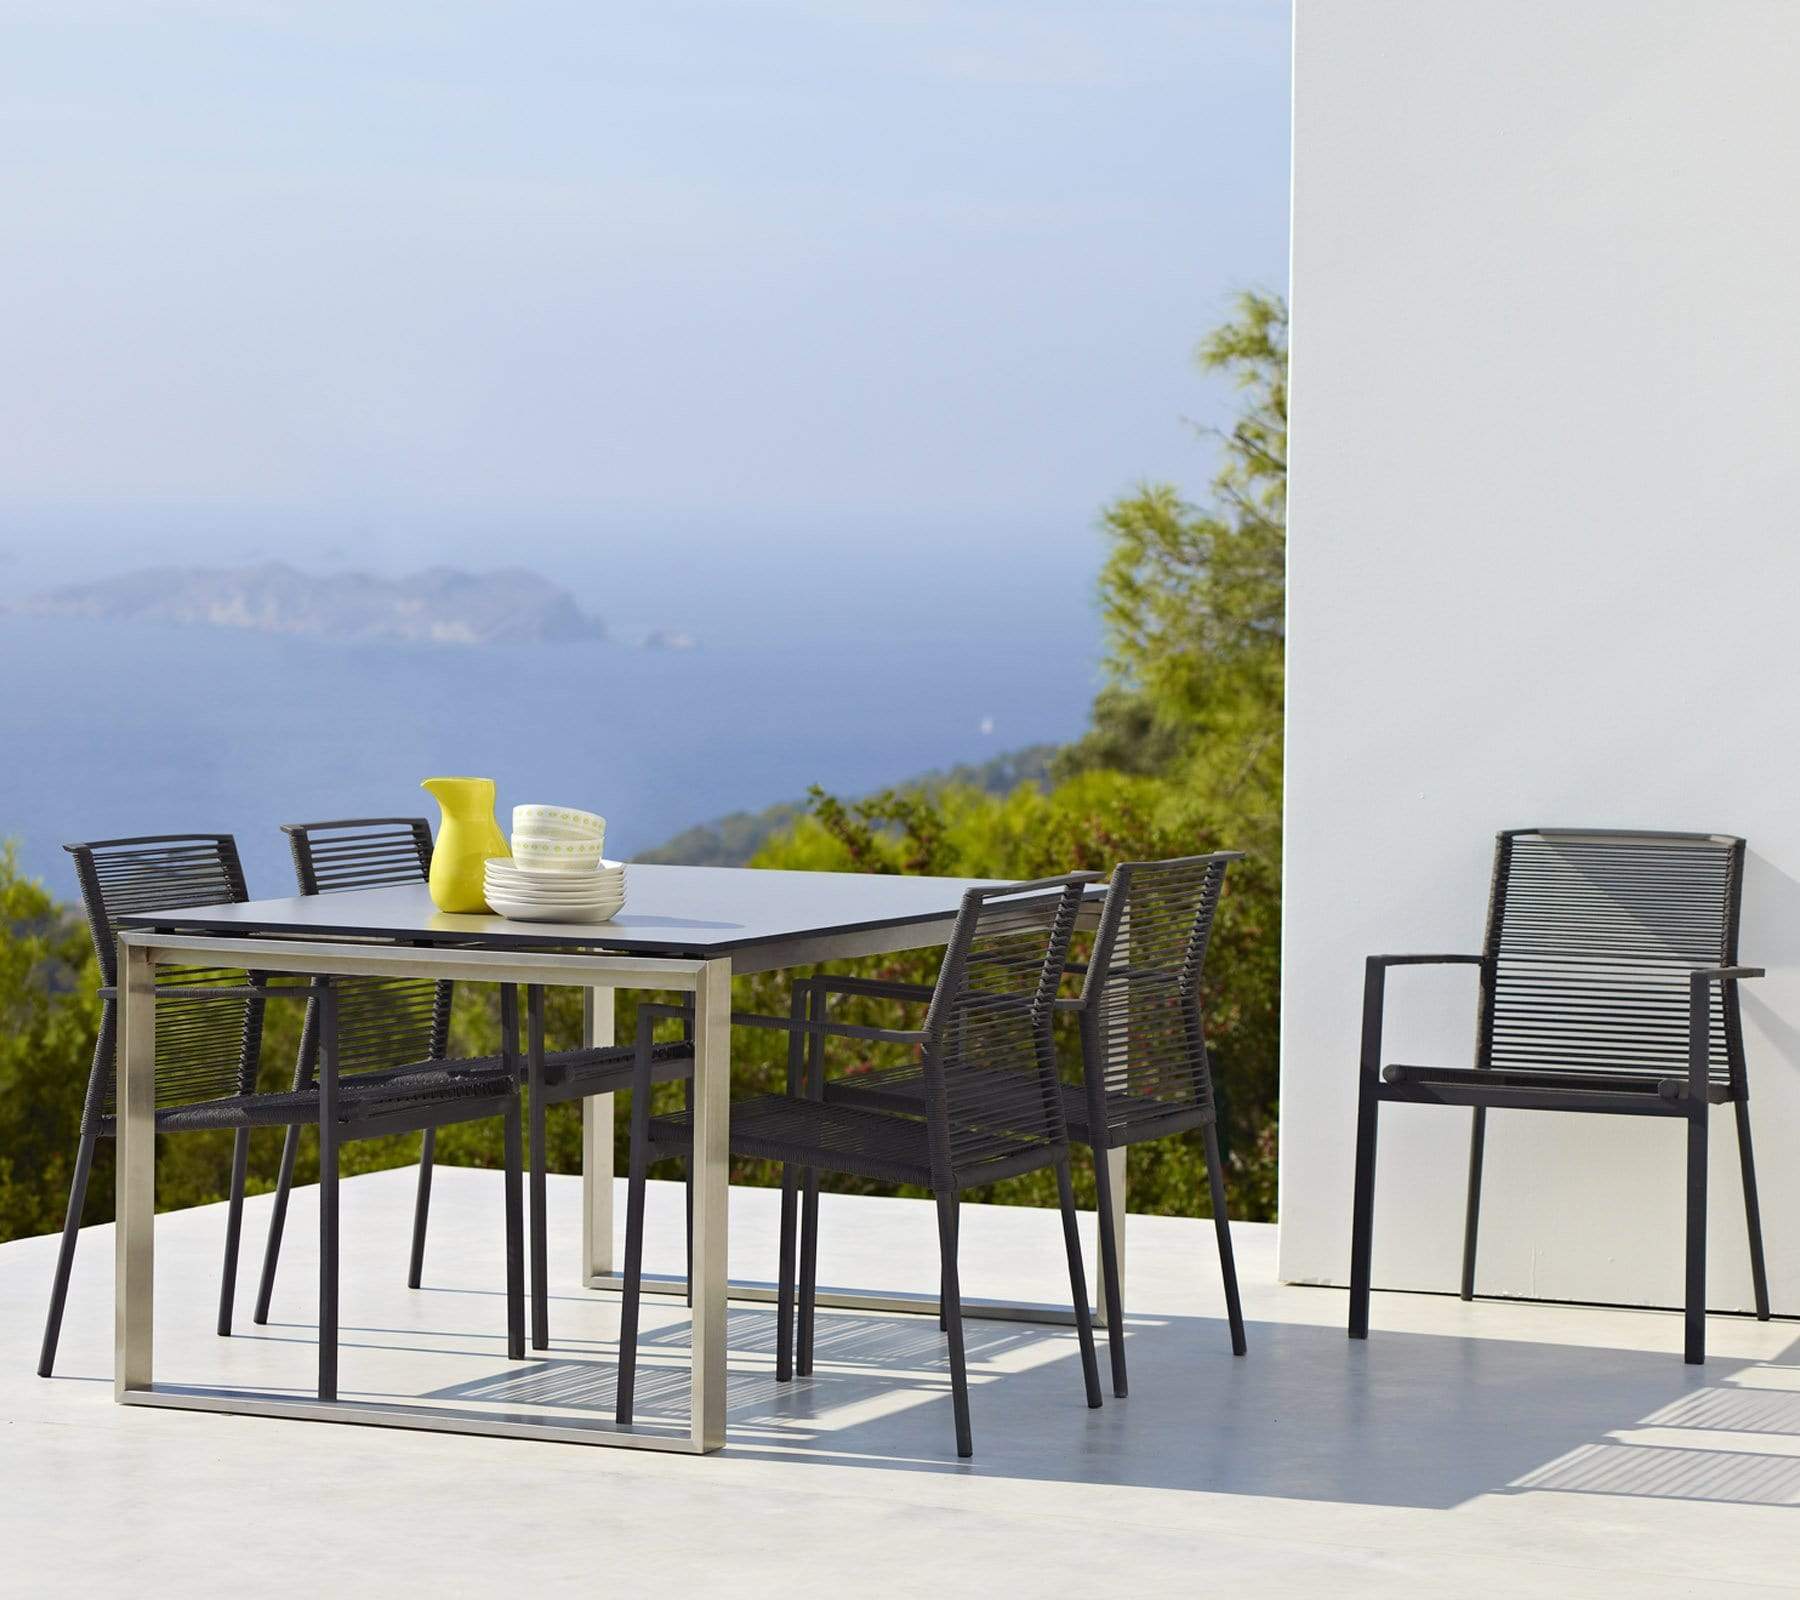 Boxhill's Edge Stackable Outdoor Armchair lifestyle image with dining table at patio